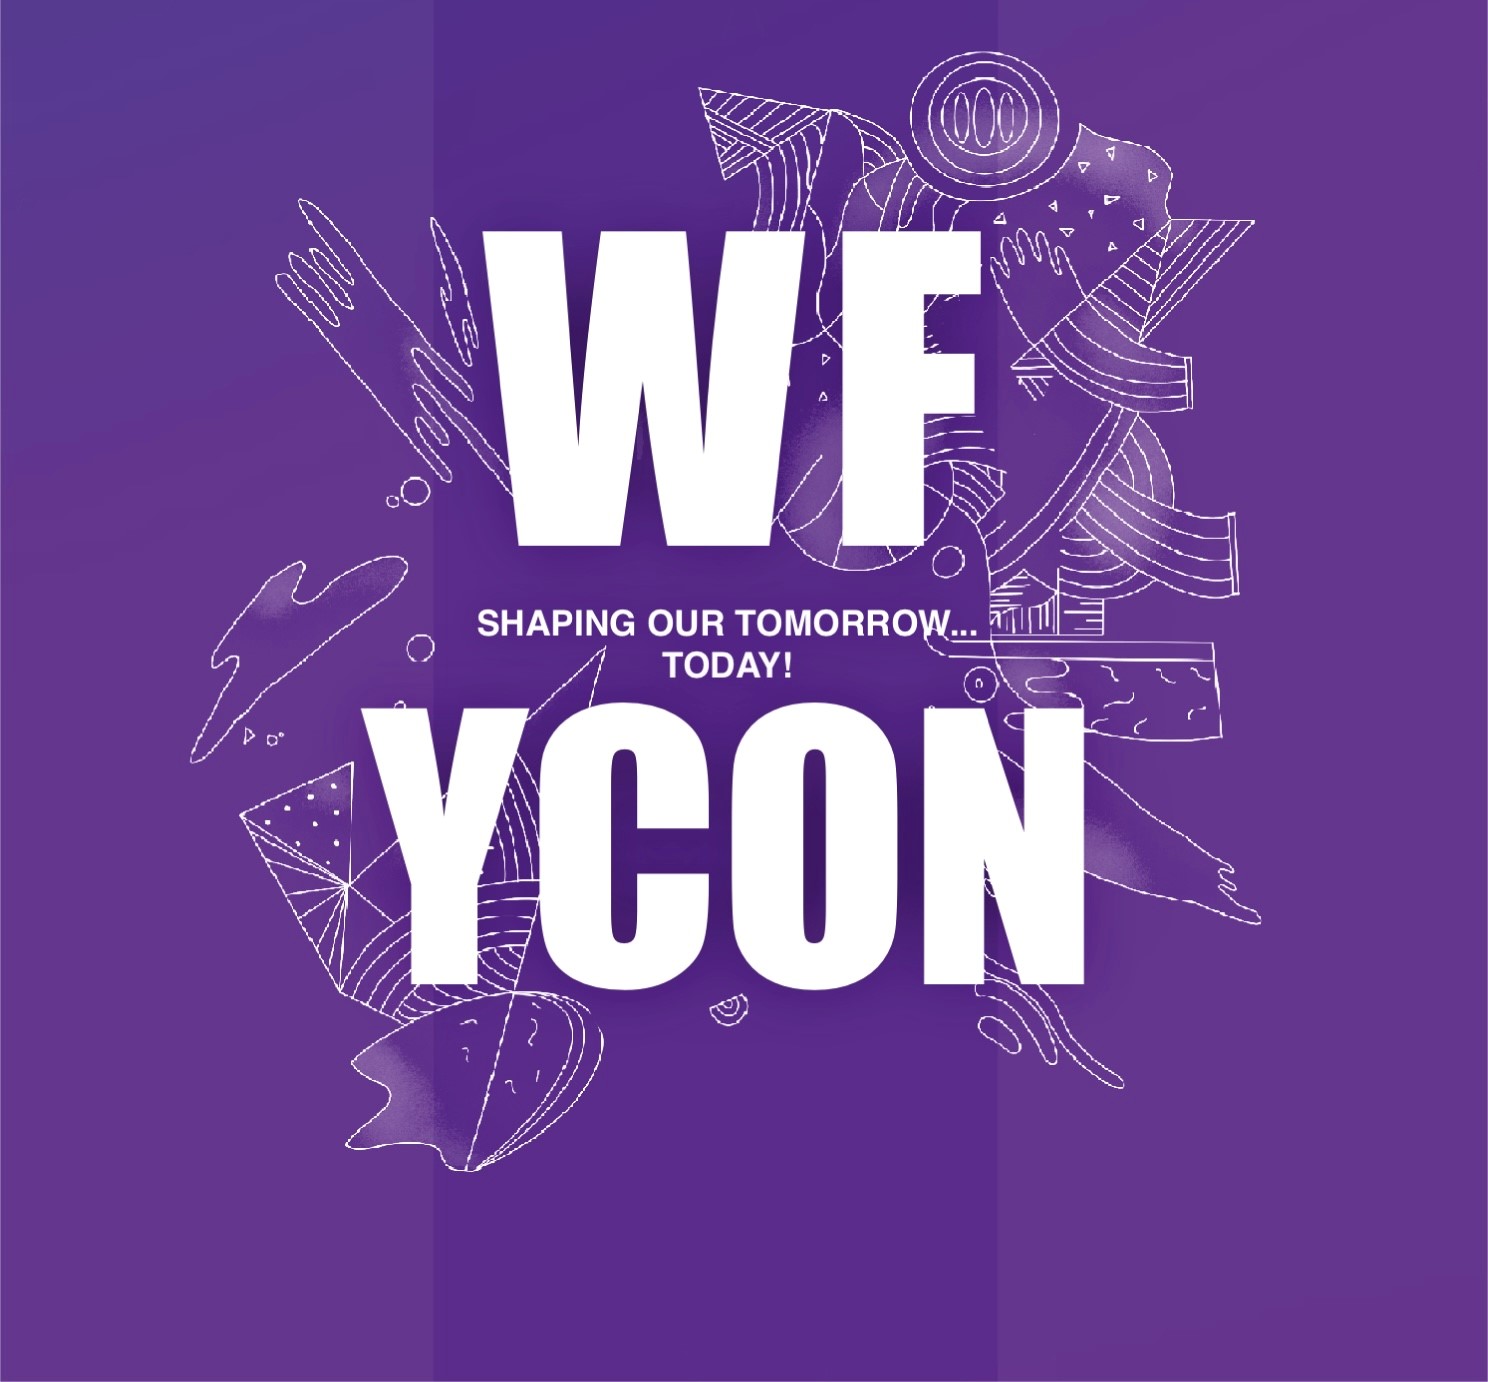 The World Federation Youth Conference – Shaping our tomorrow… Today!